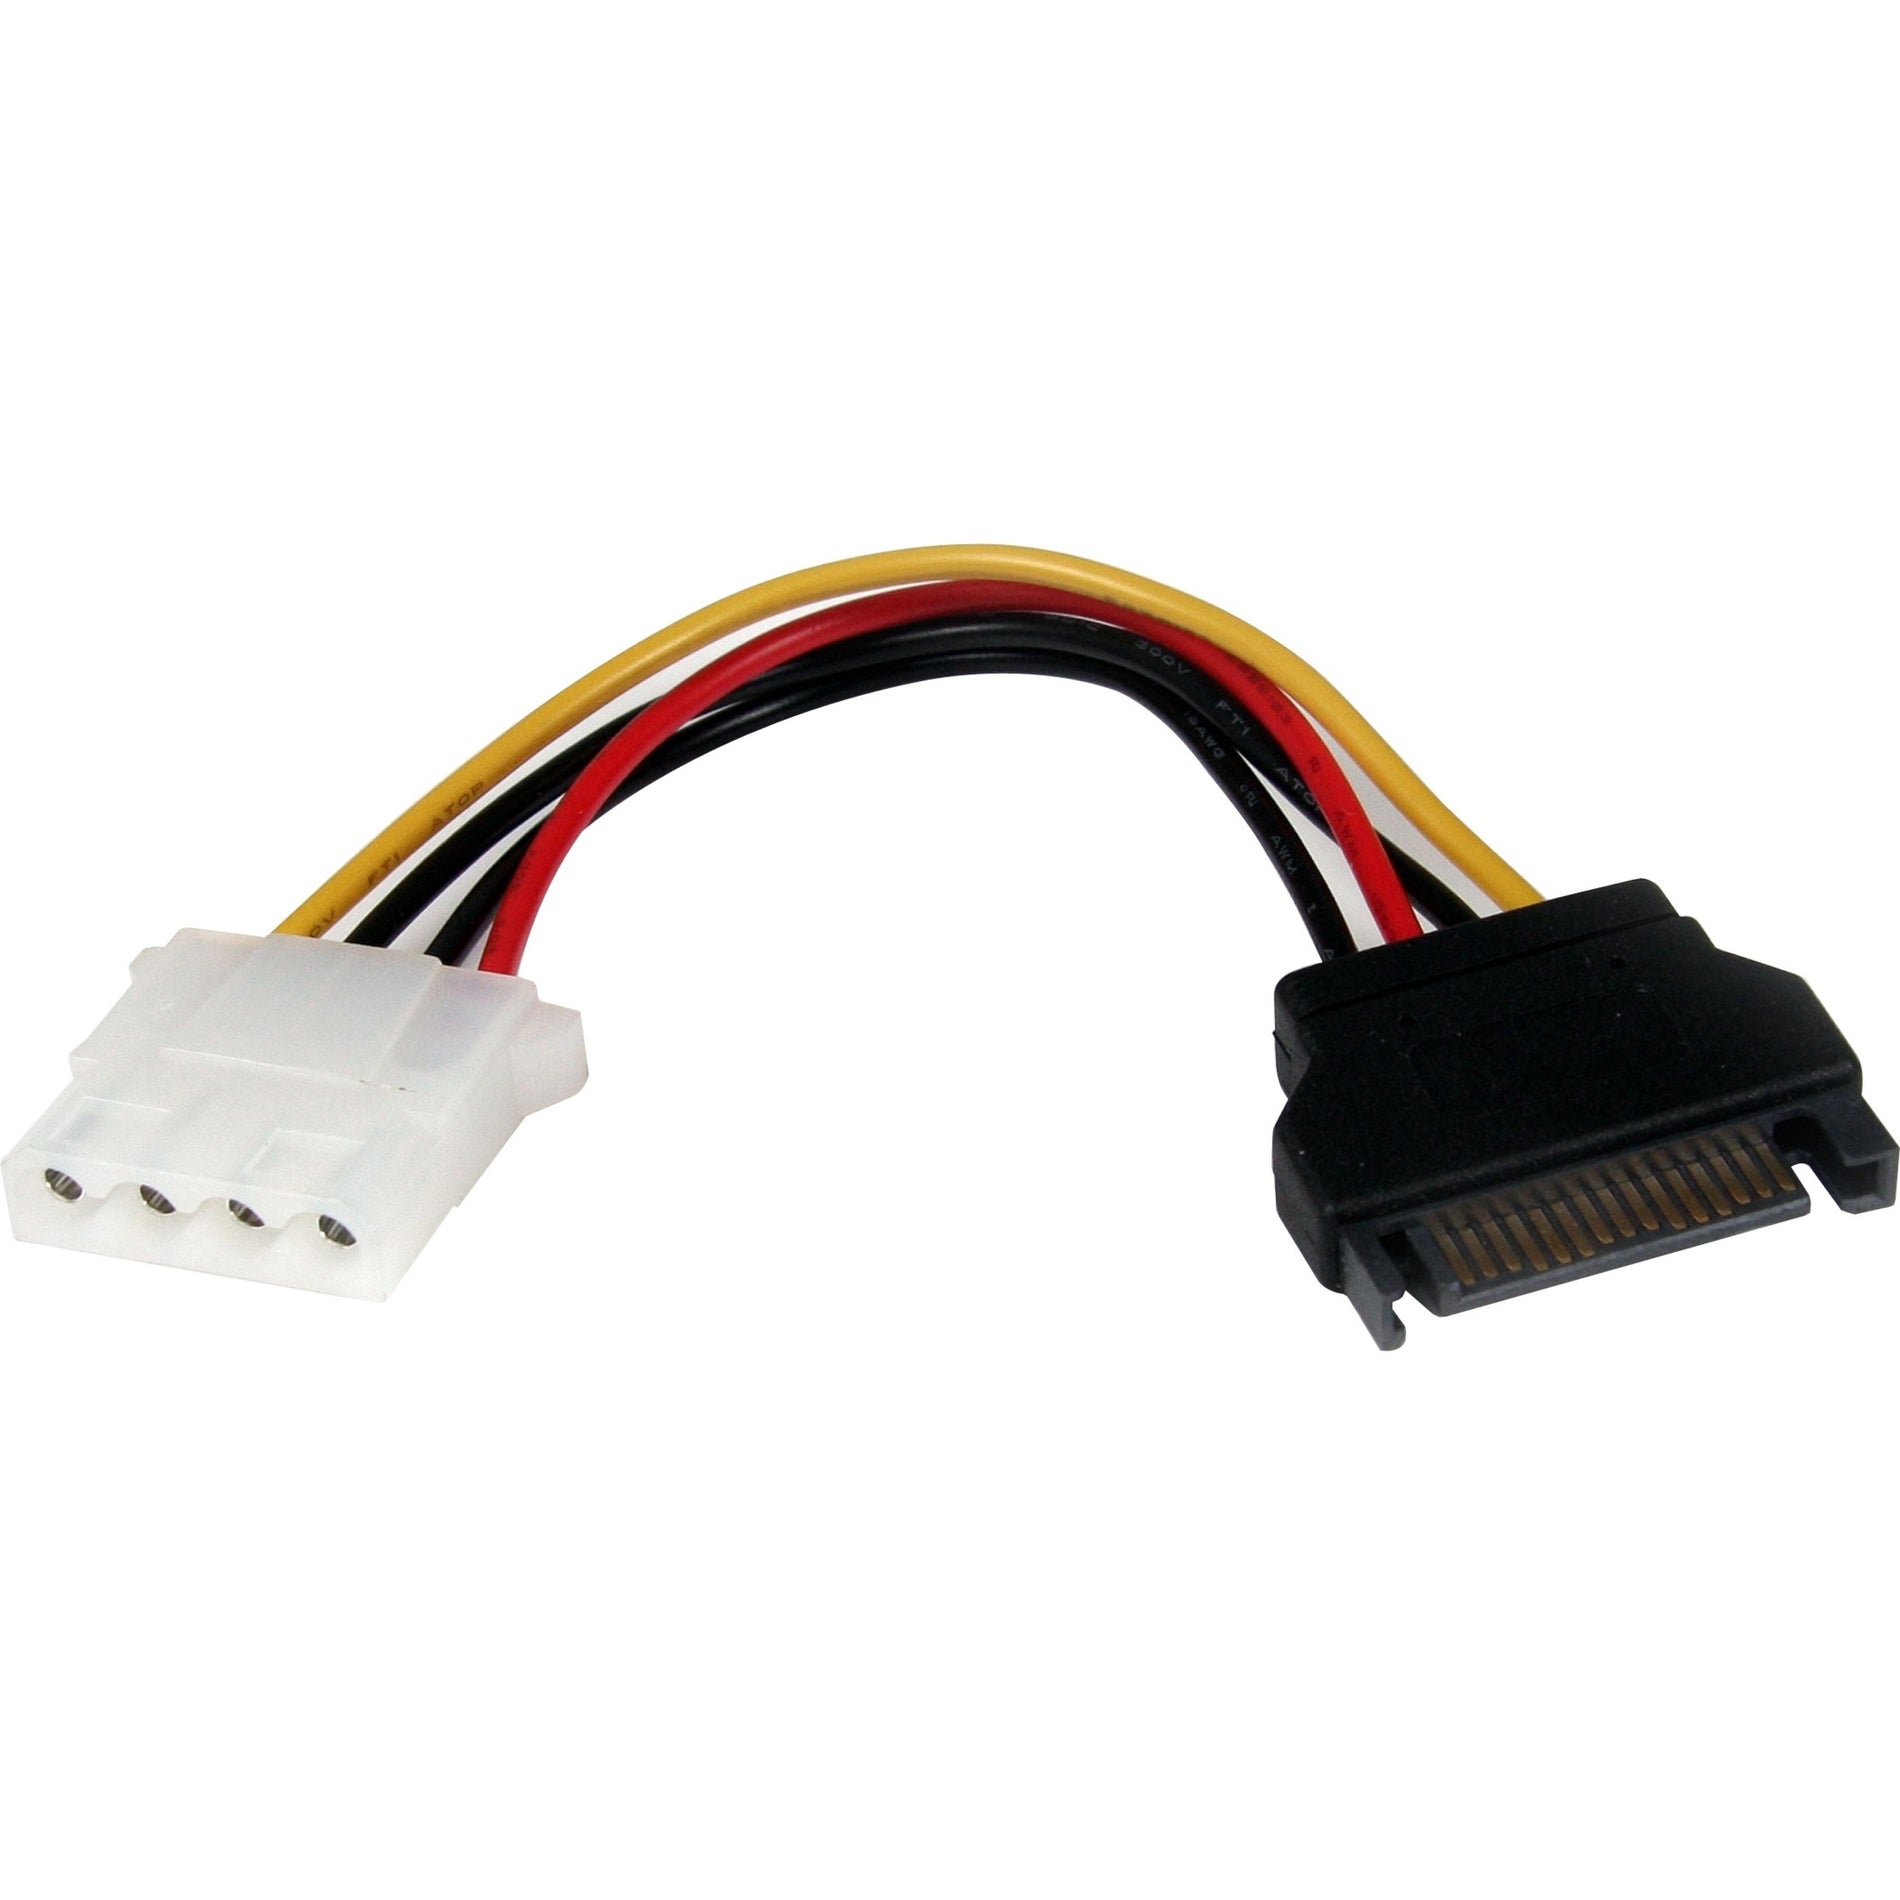 StarTech.com LP4SATAFM6IN 6in SATA to LP4 Power Cable Adapter, Easy Hard Drive Power Connection